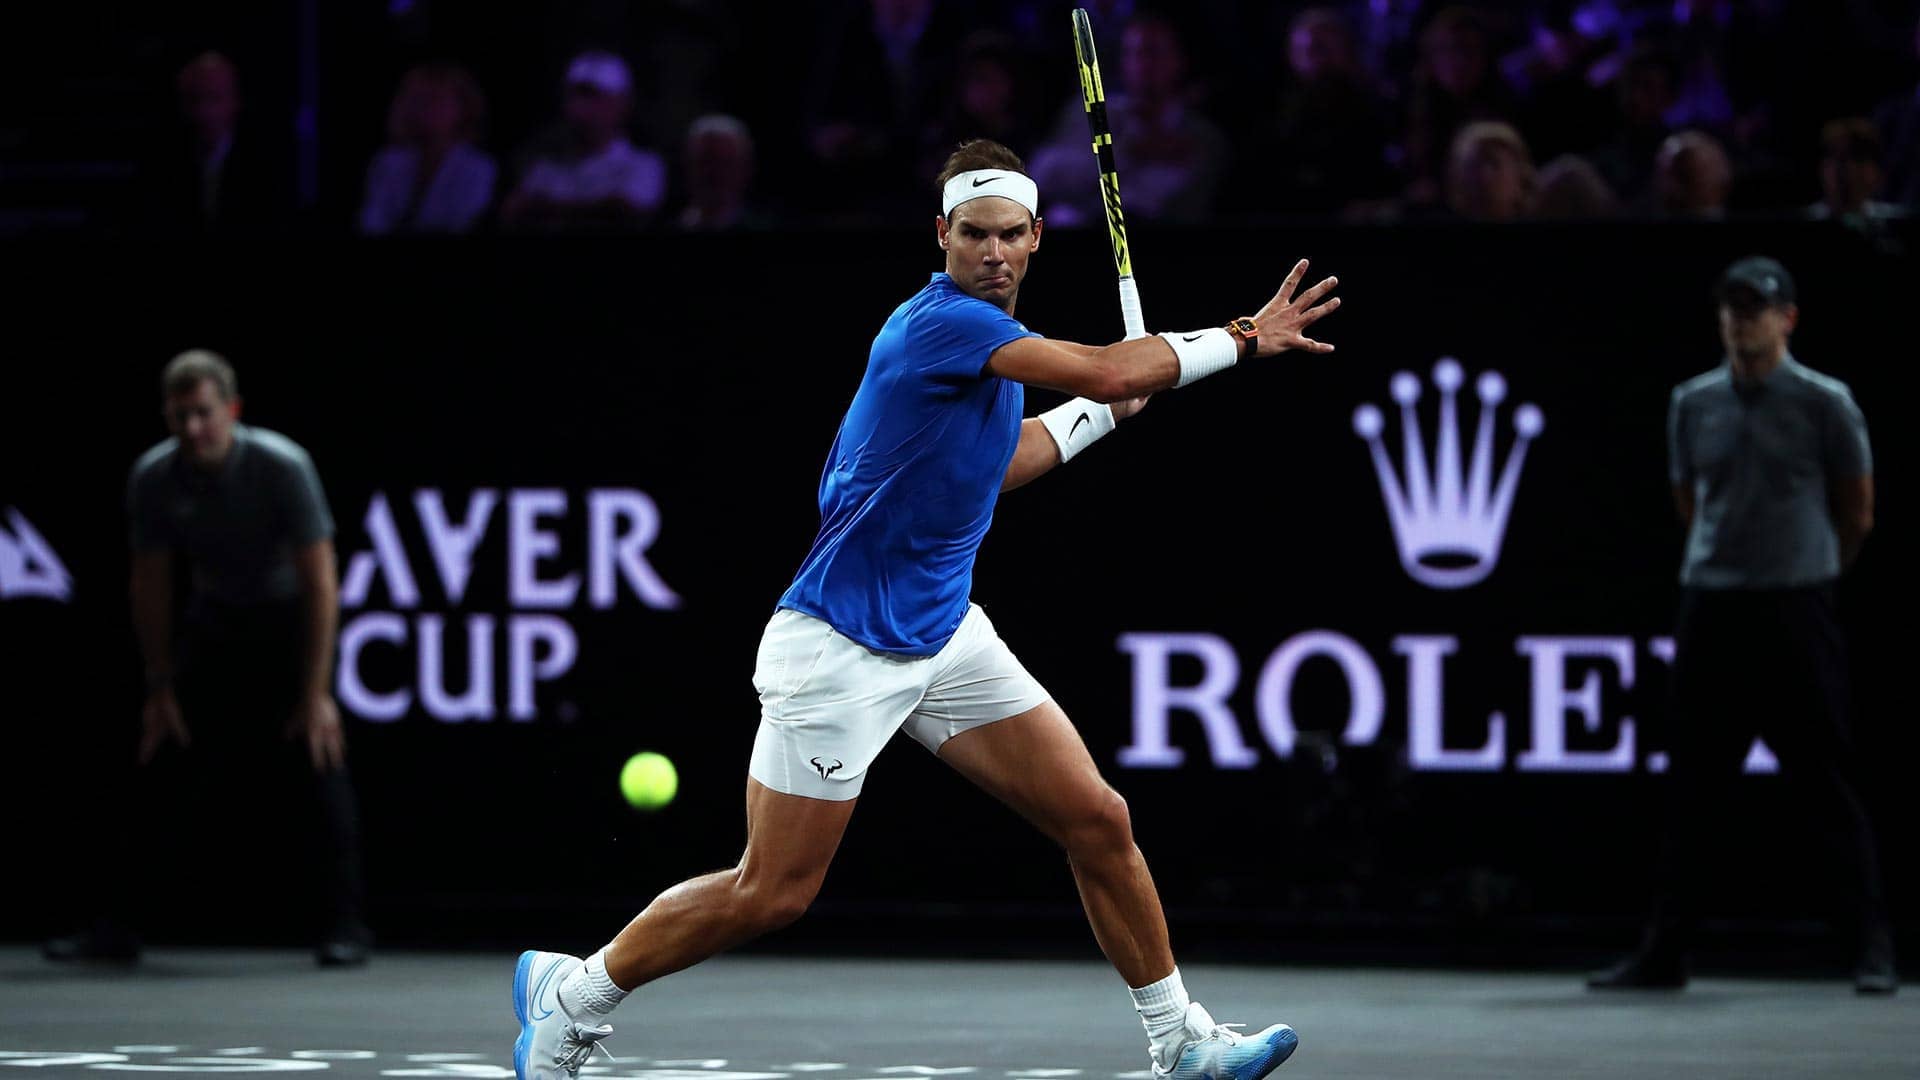 Nadal joins Team Europe for Laver Cup Berlin